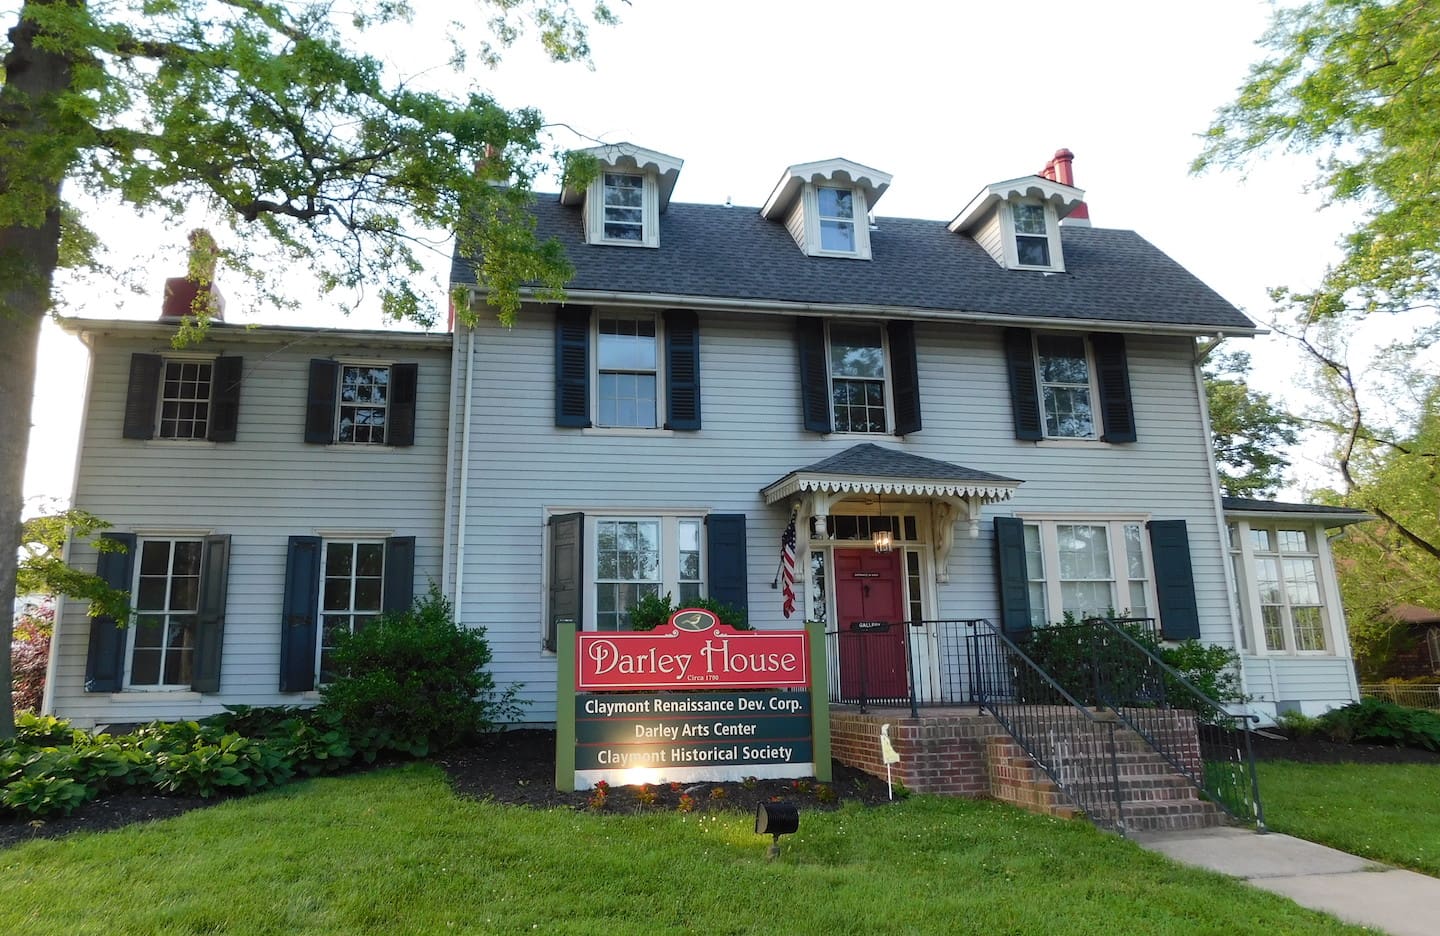 Renovations are underway at the Darley House. (Claymont Renaissance Development Corp.)